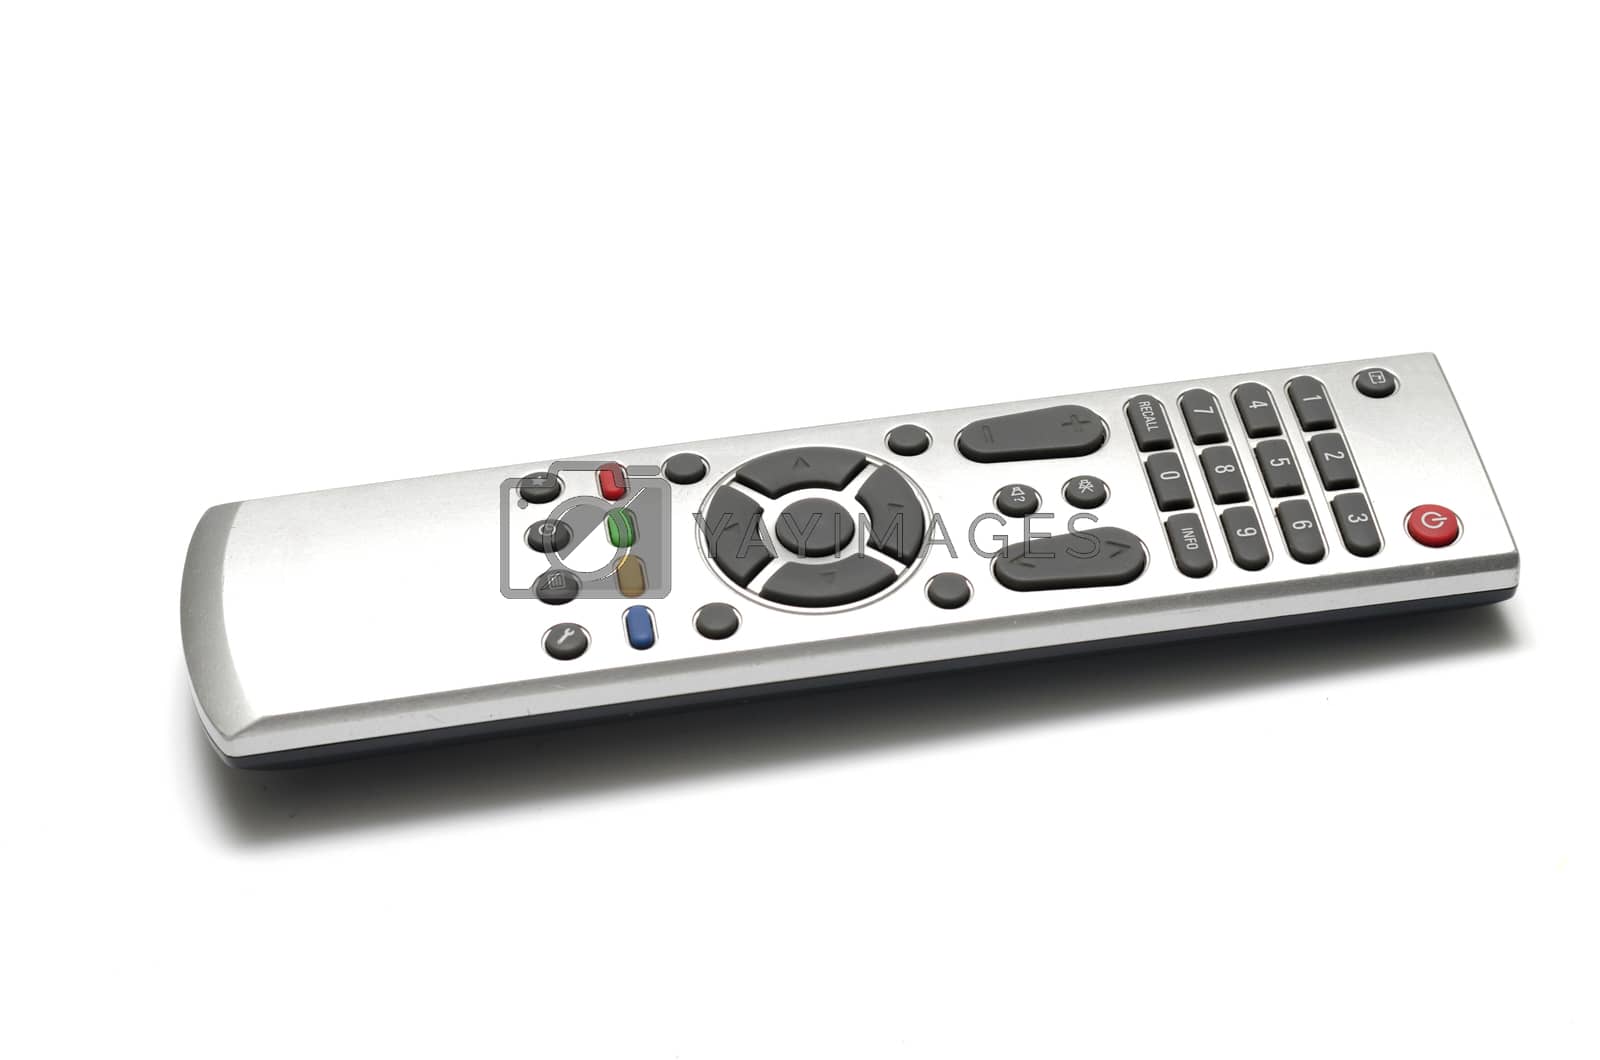 Royalty free image of television remote by ammza12